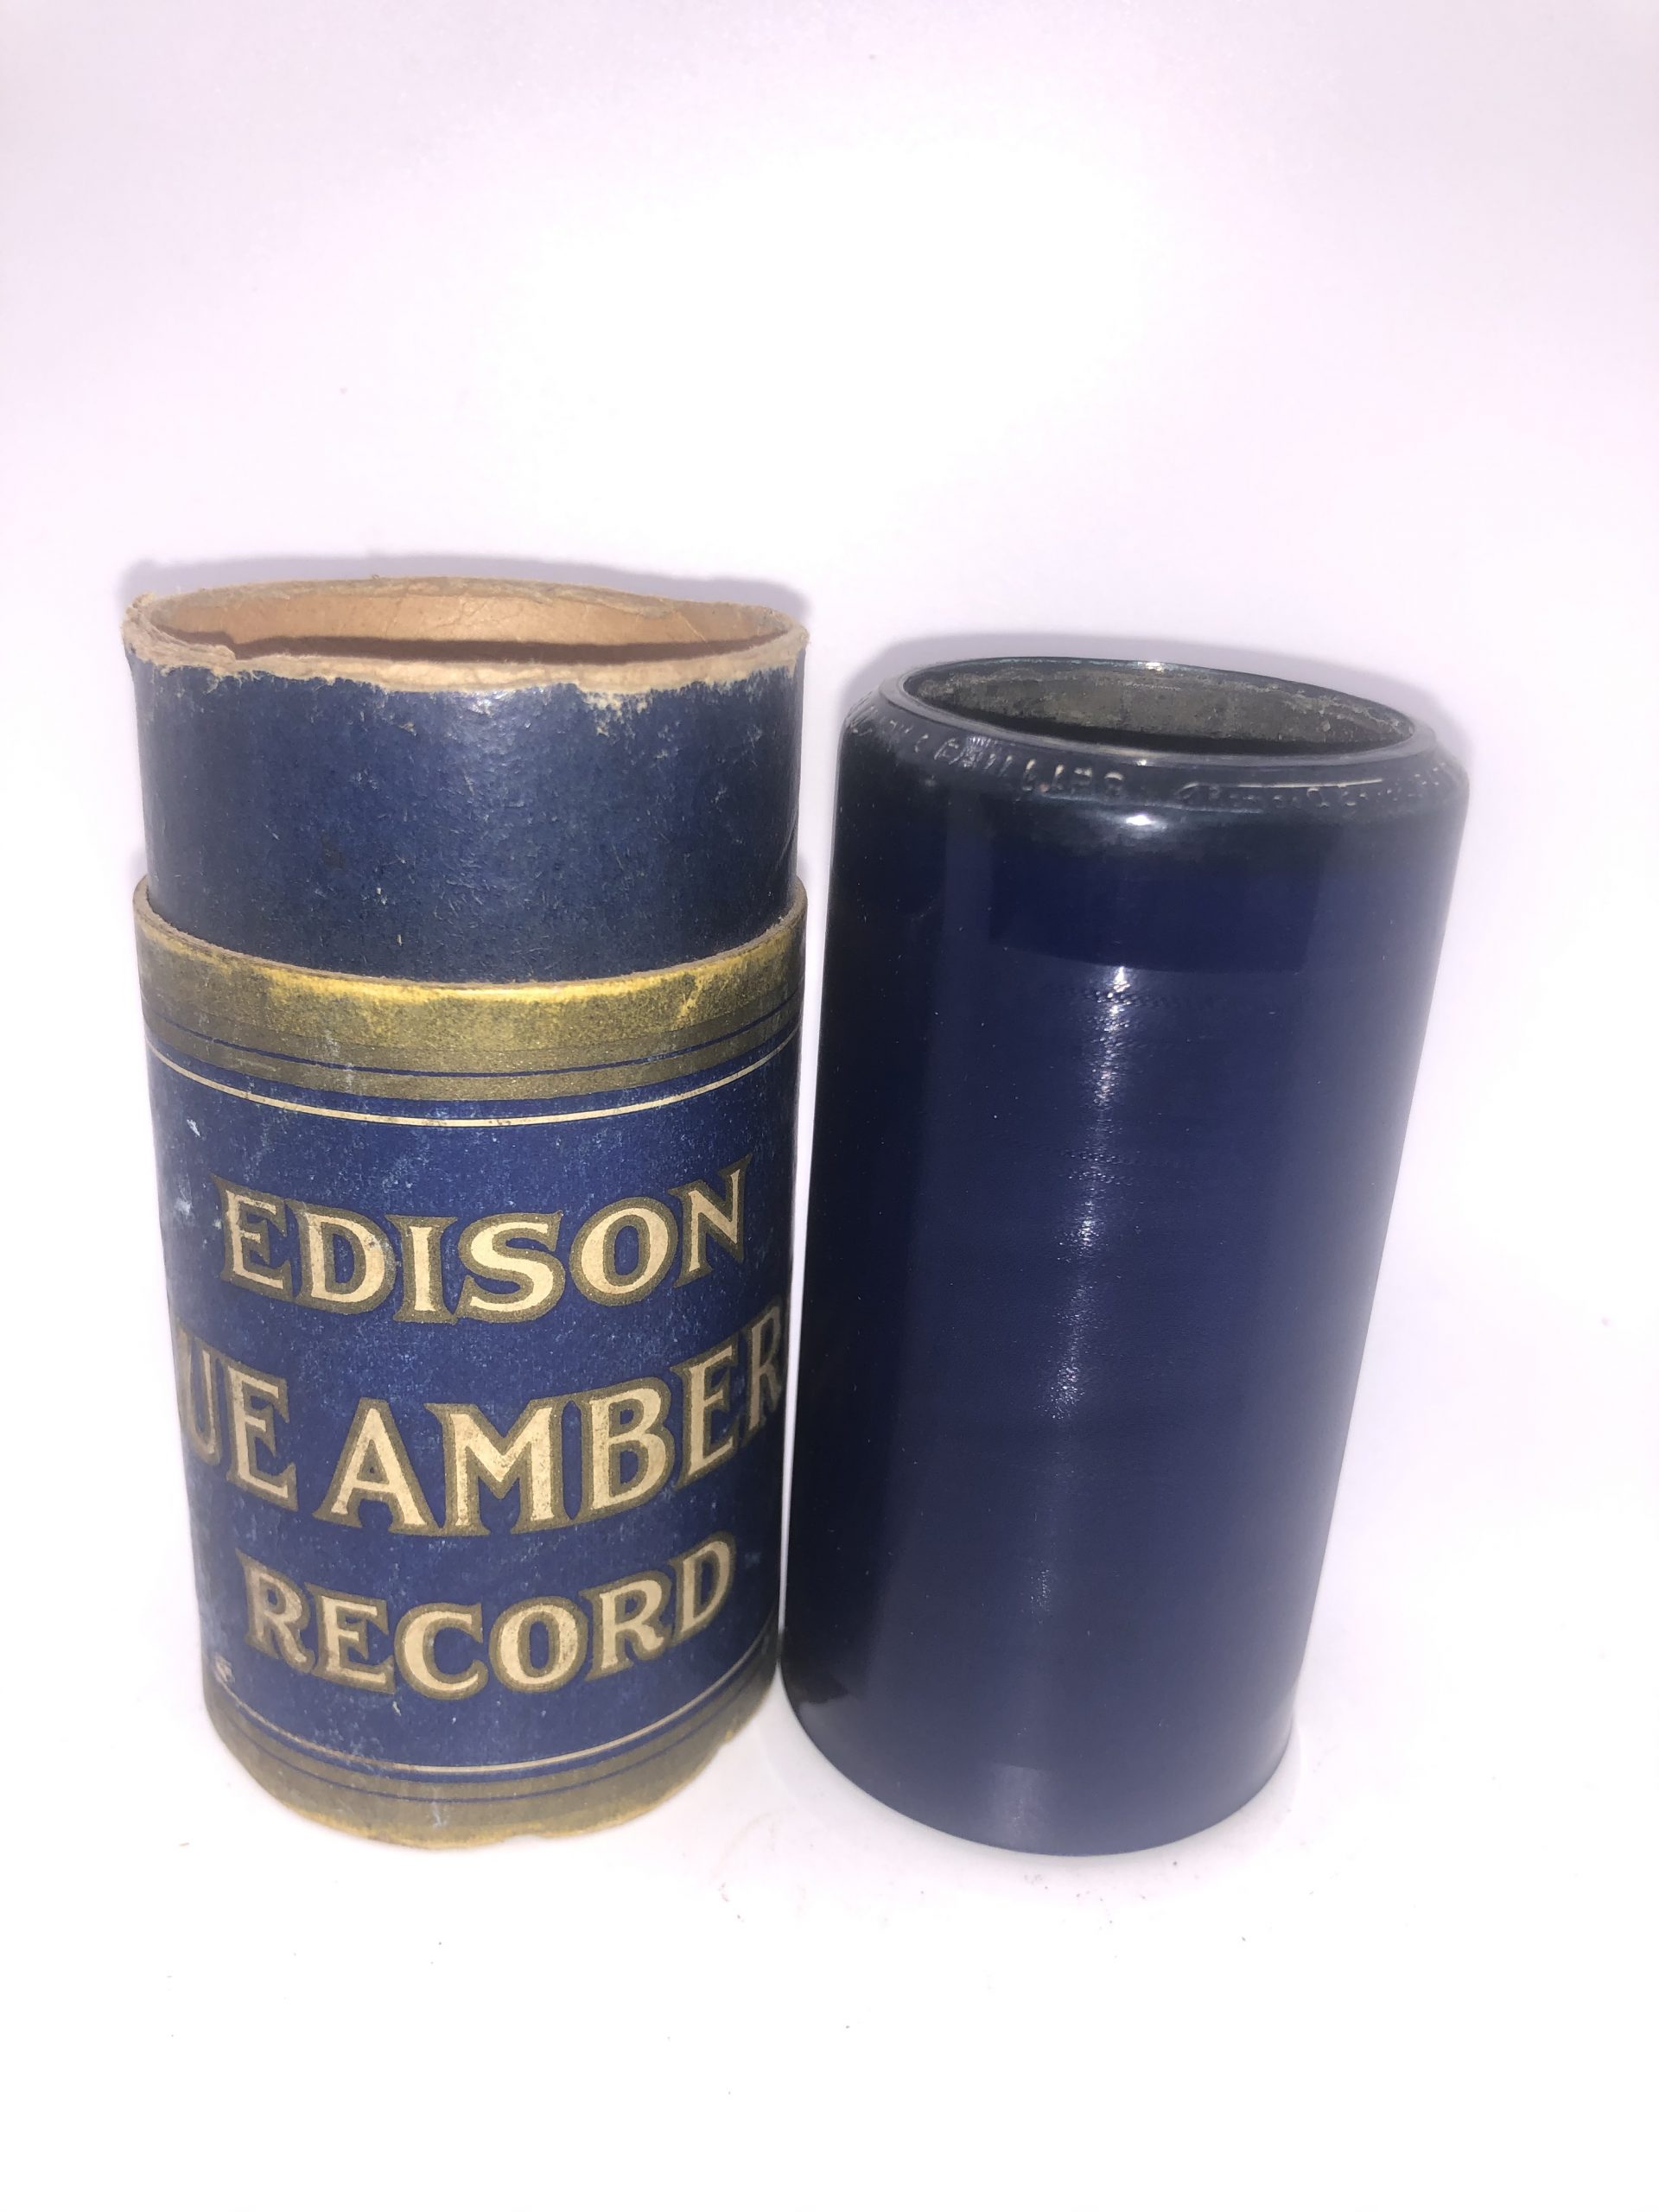 Edison 4-minute Cylinder…” What d’ye Mean You Lost yer Dog”